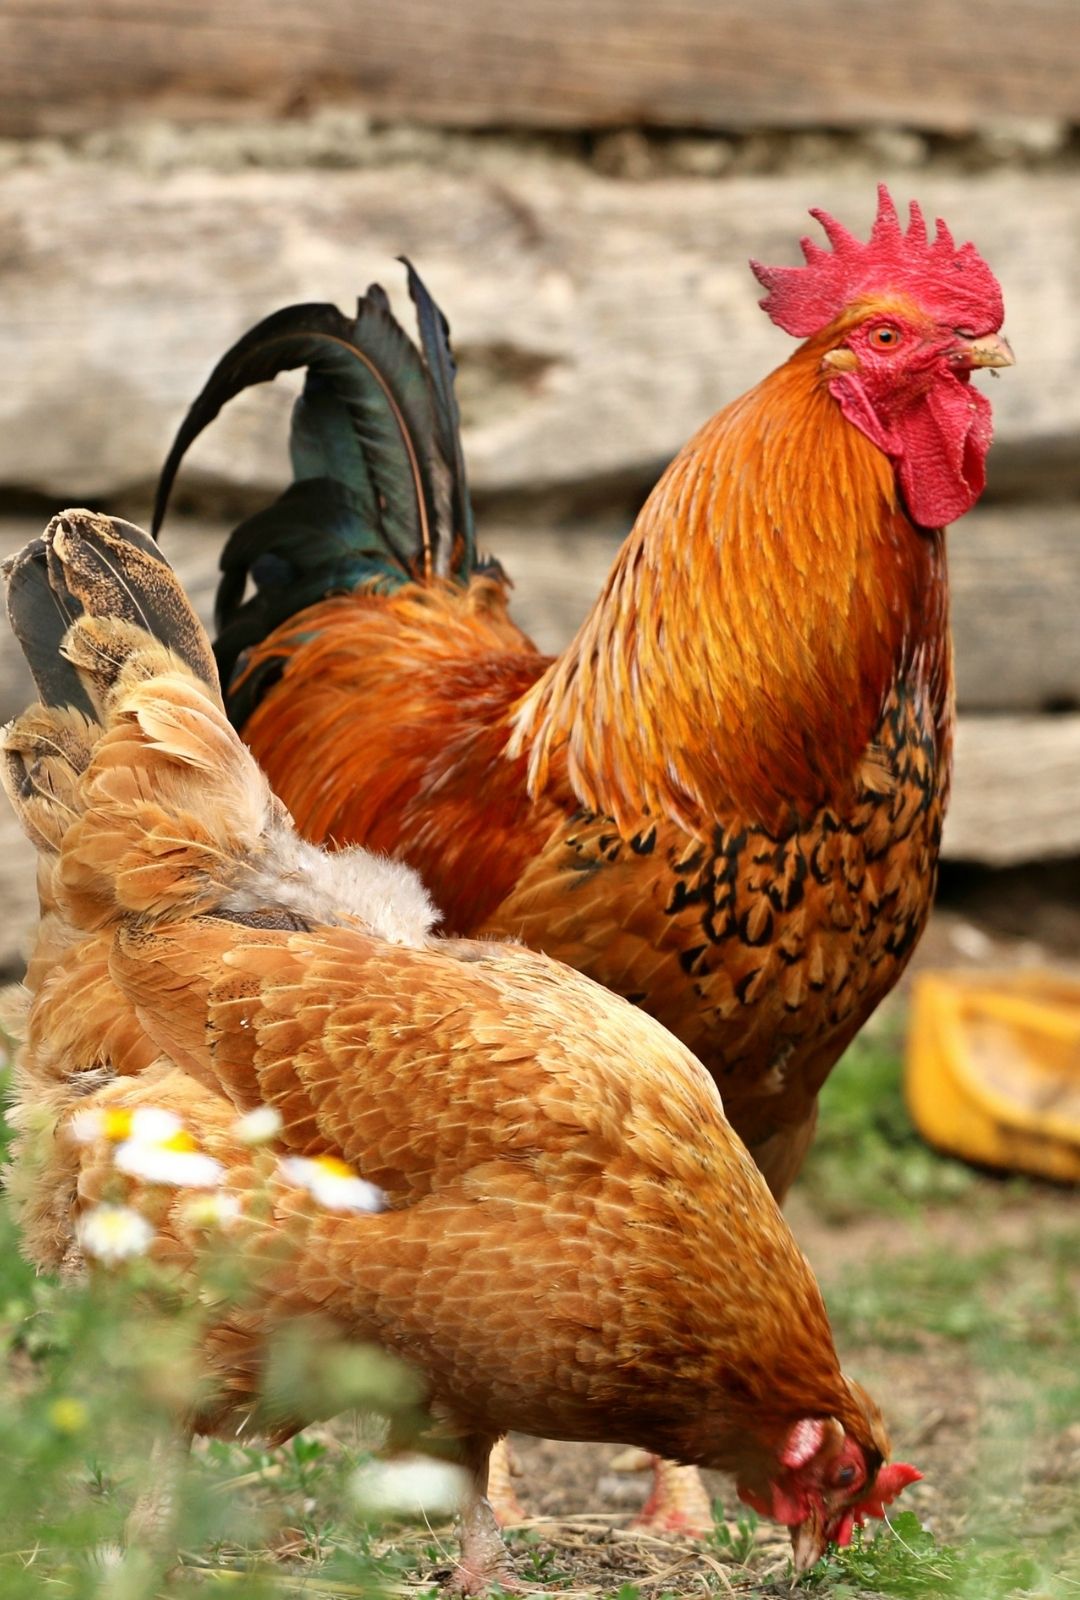 Outdoor chickens